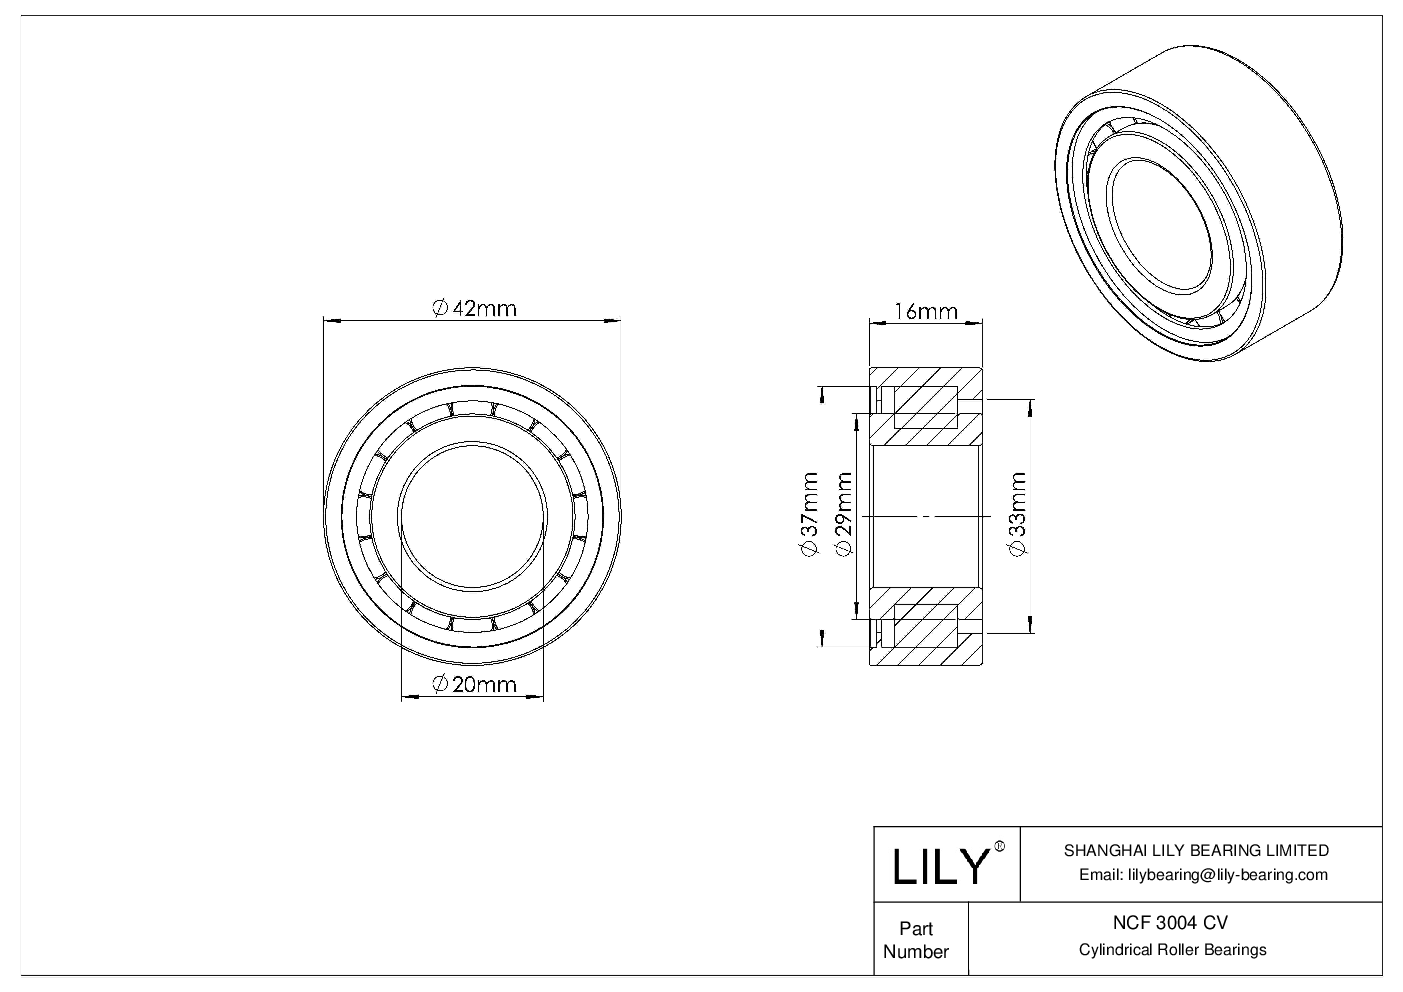 NCF 3004 CV Single Row Full Complement Cylindrical Roller Bearings cad drawing